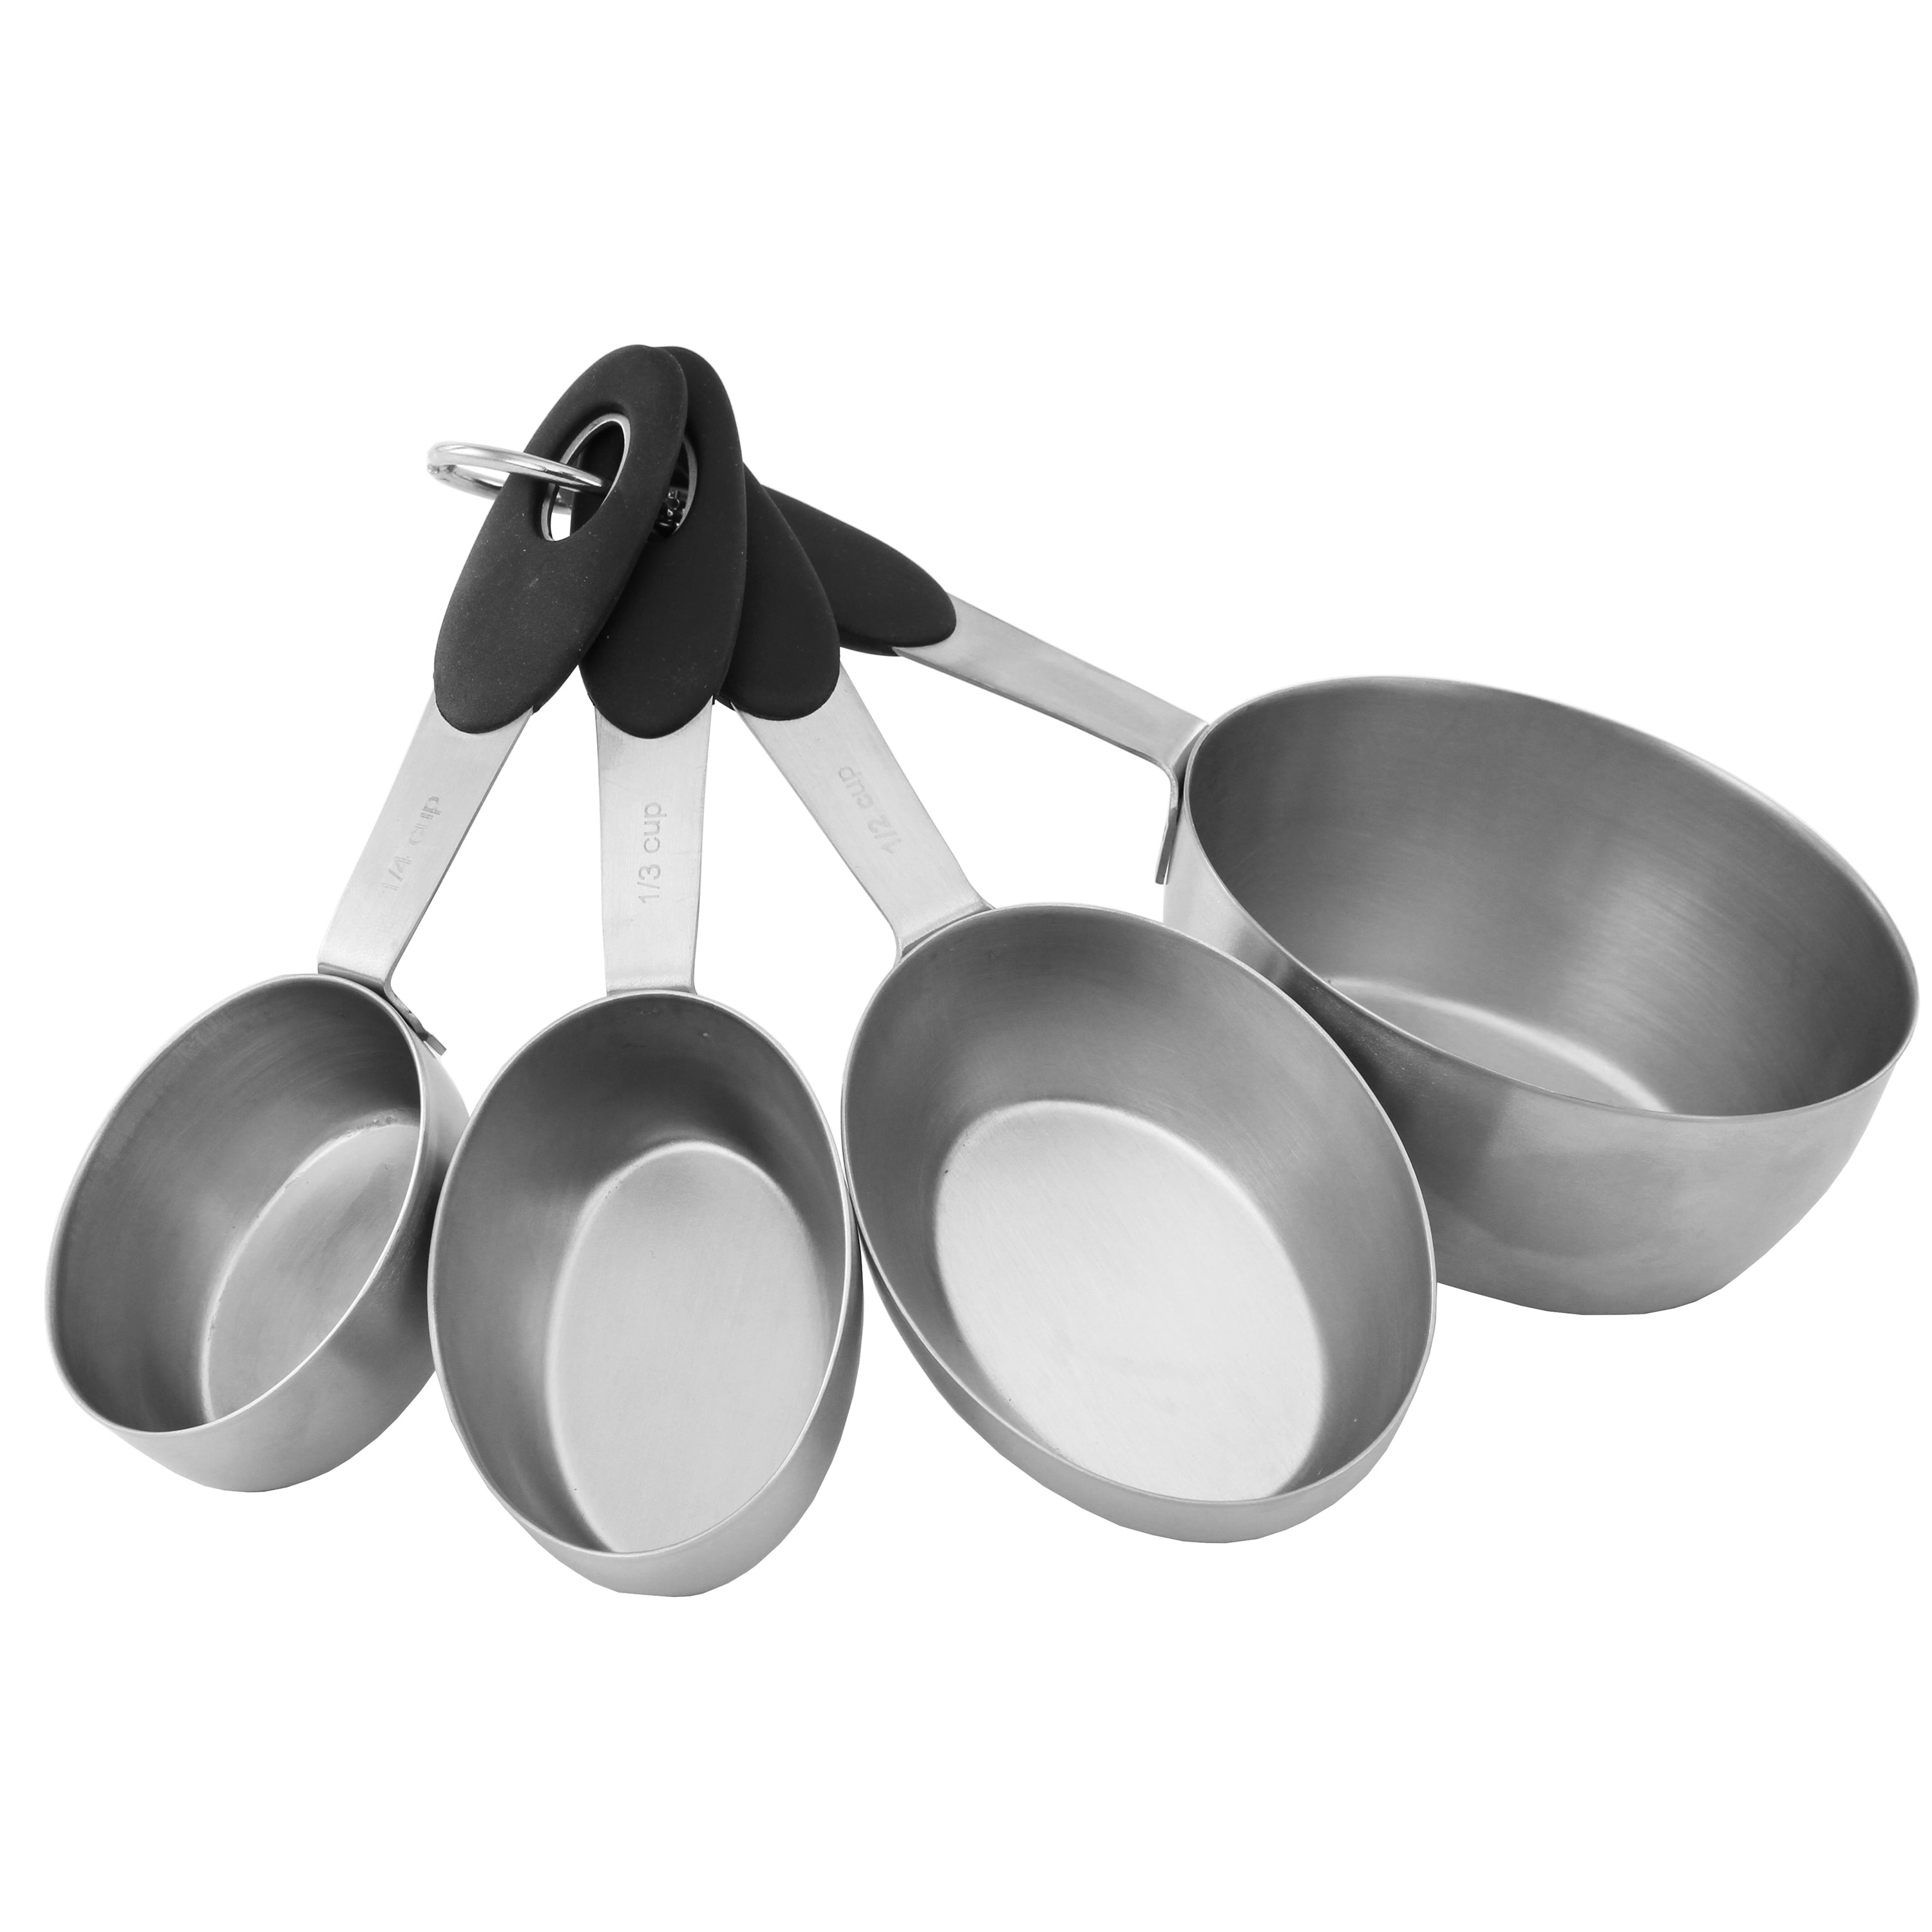 Stainless Steel Measuring Cup Set